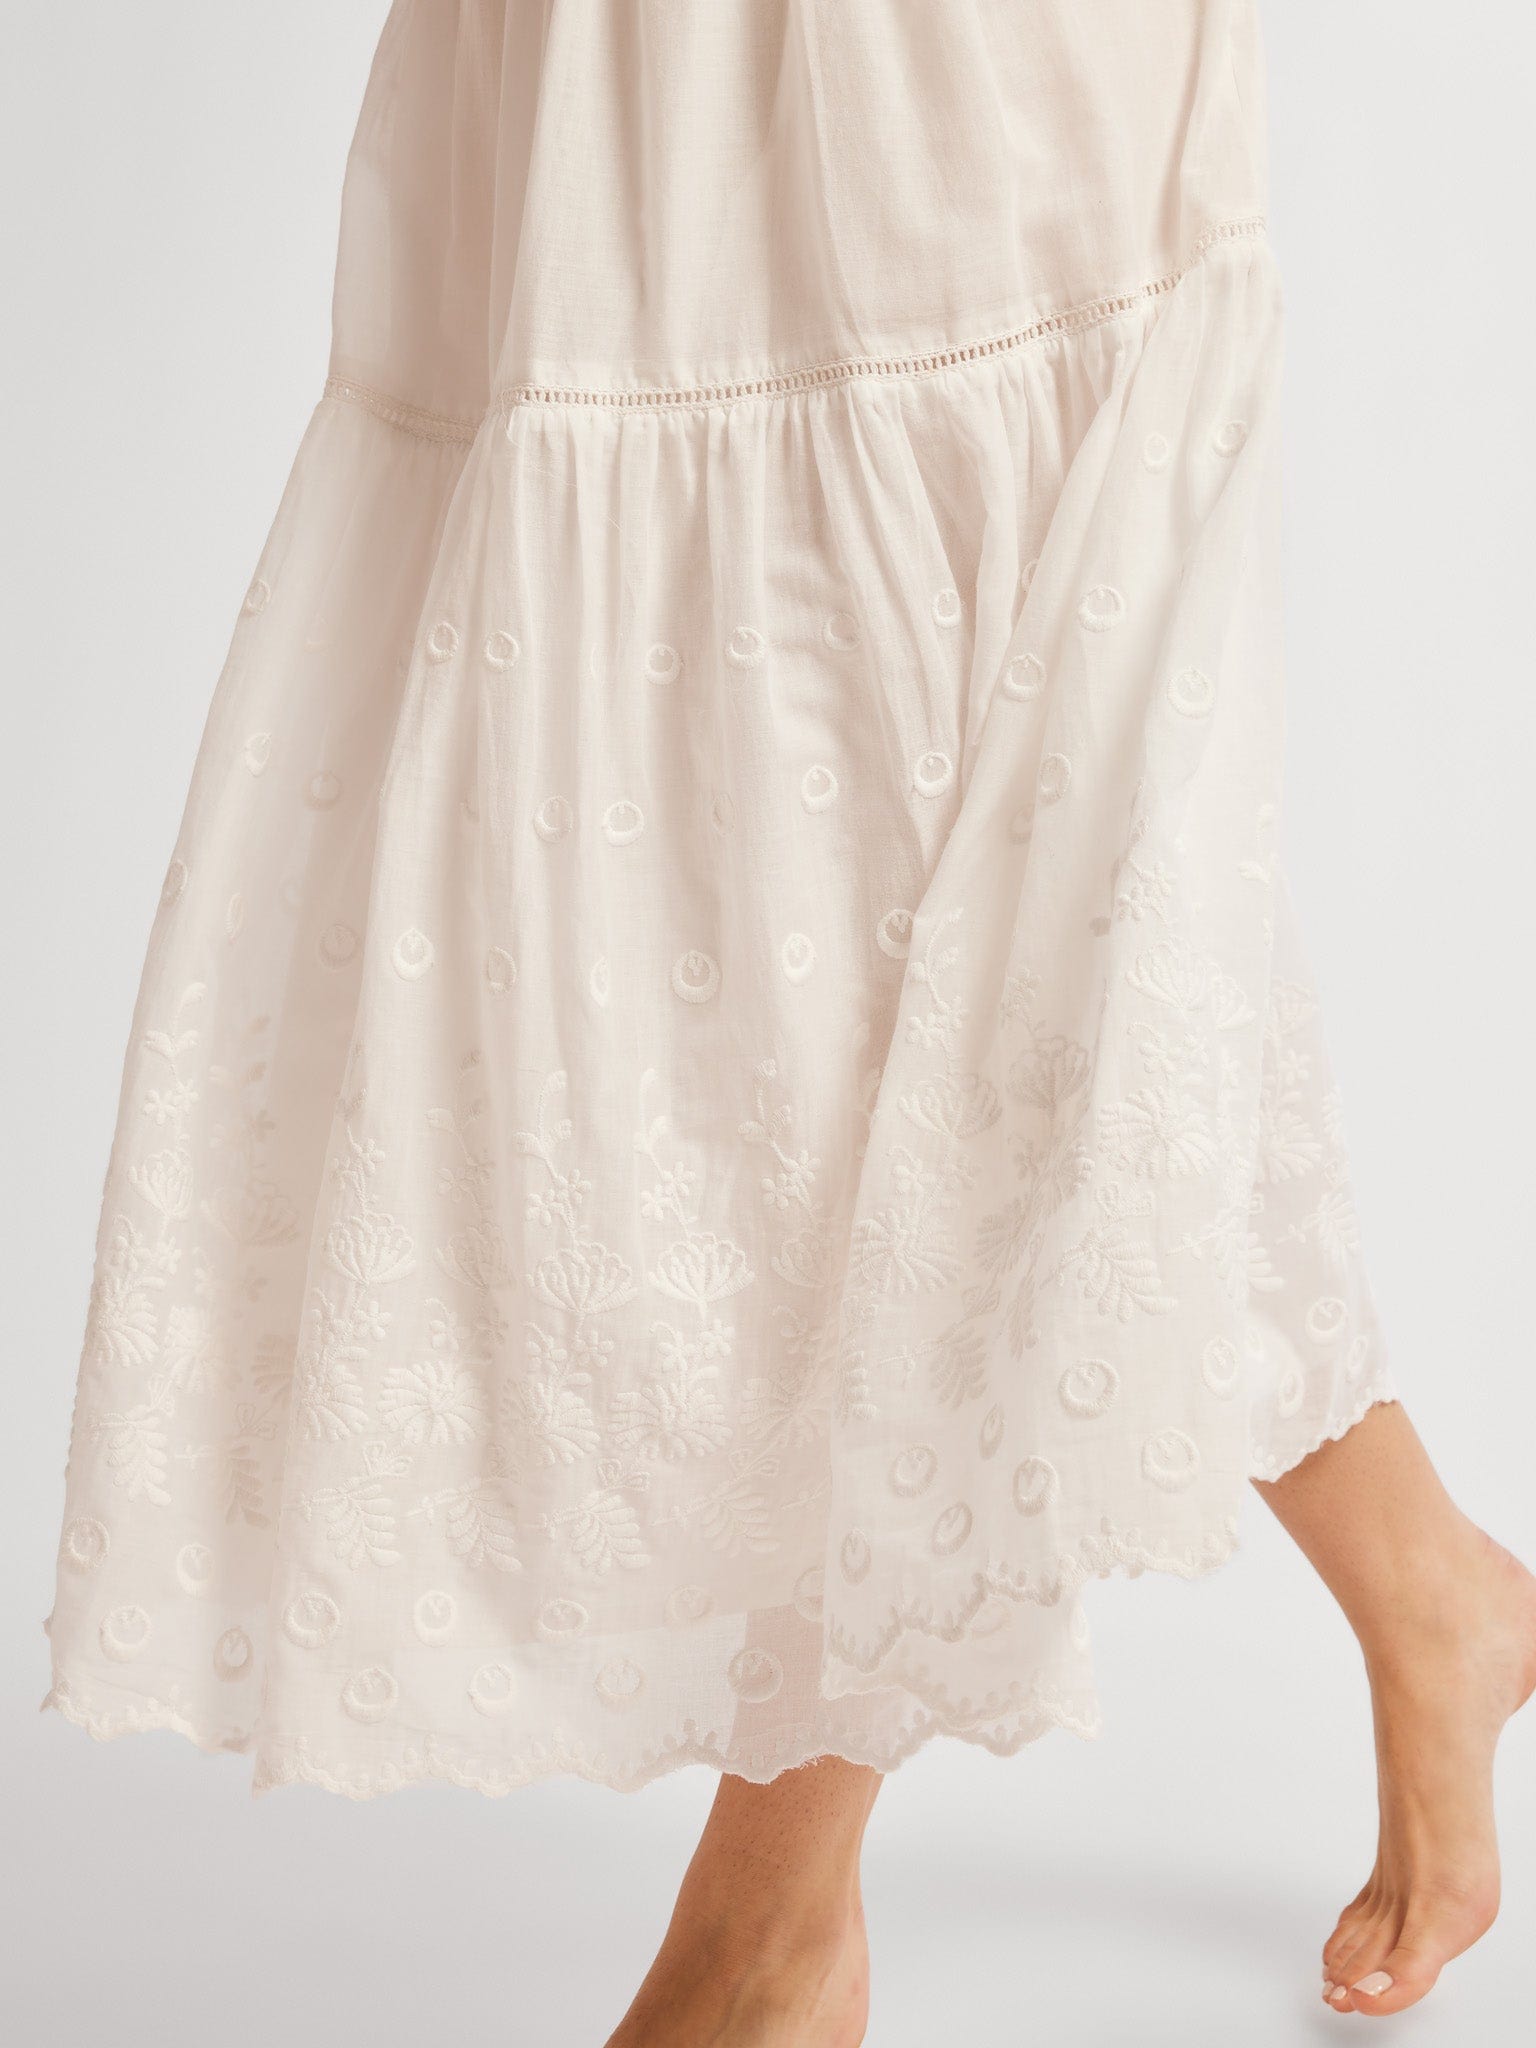 MILLE Clothing Betty Skirt in White Petal Embroidery